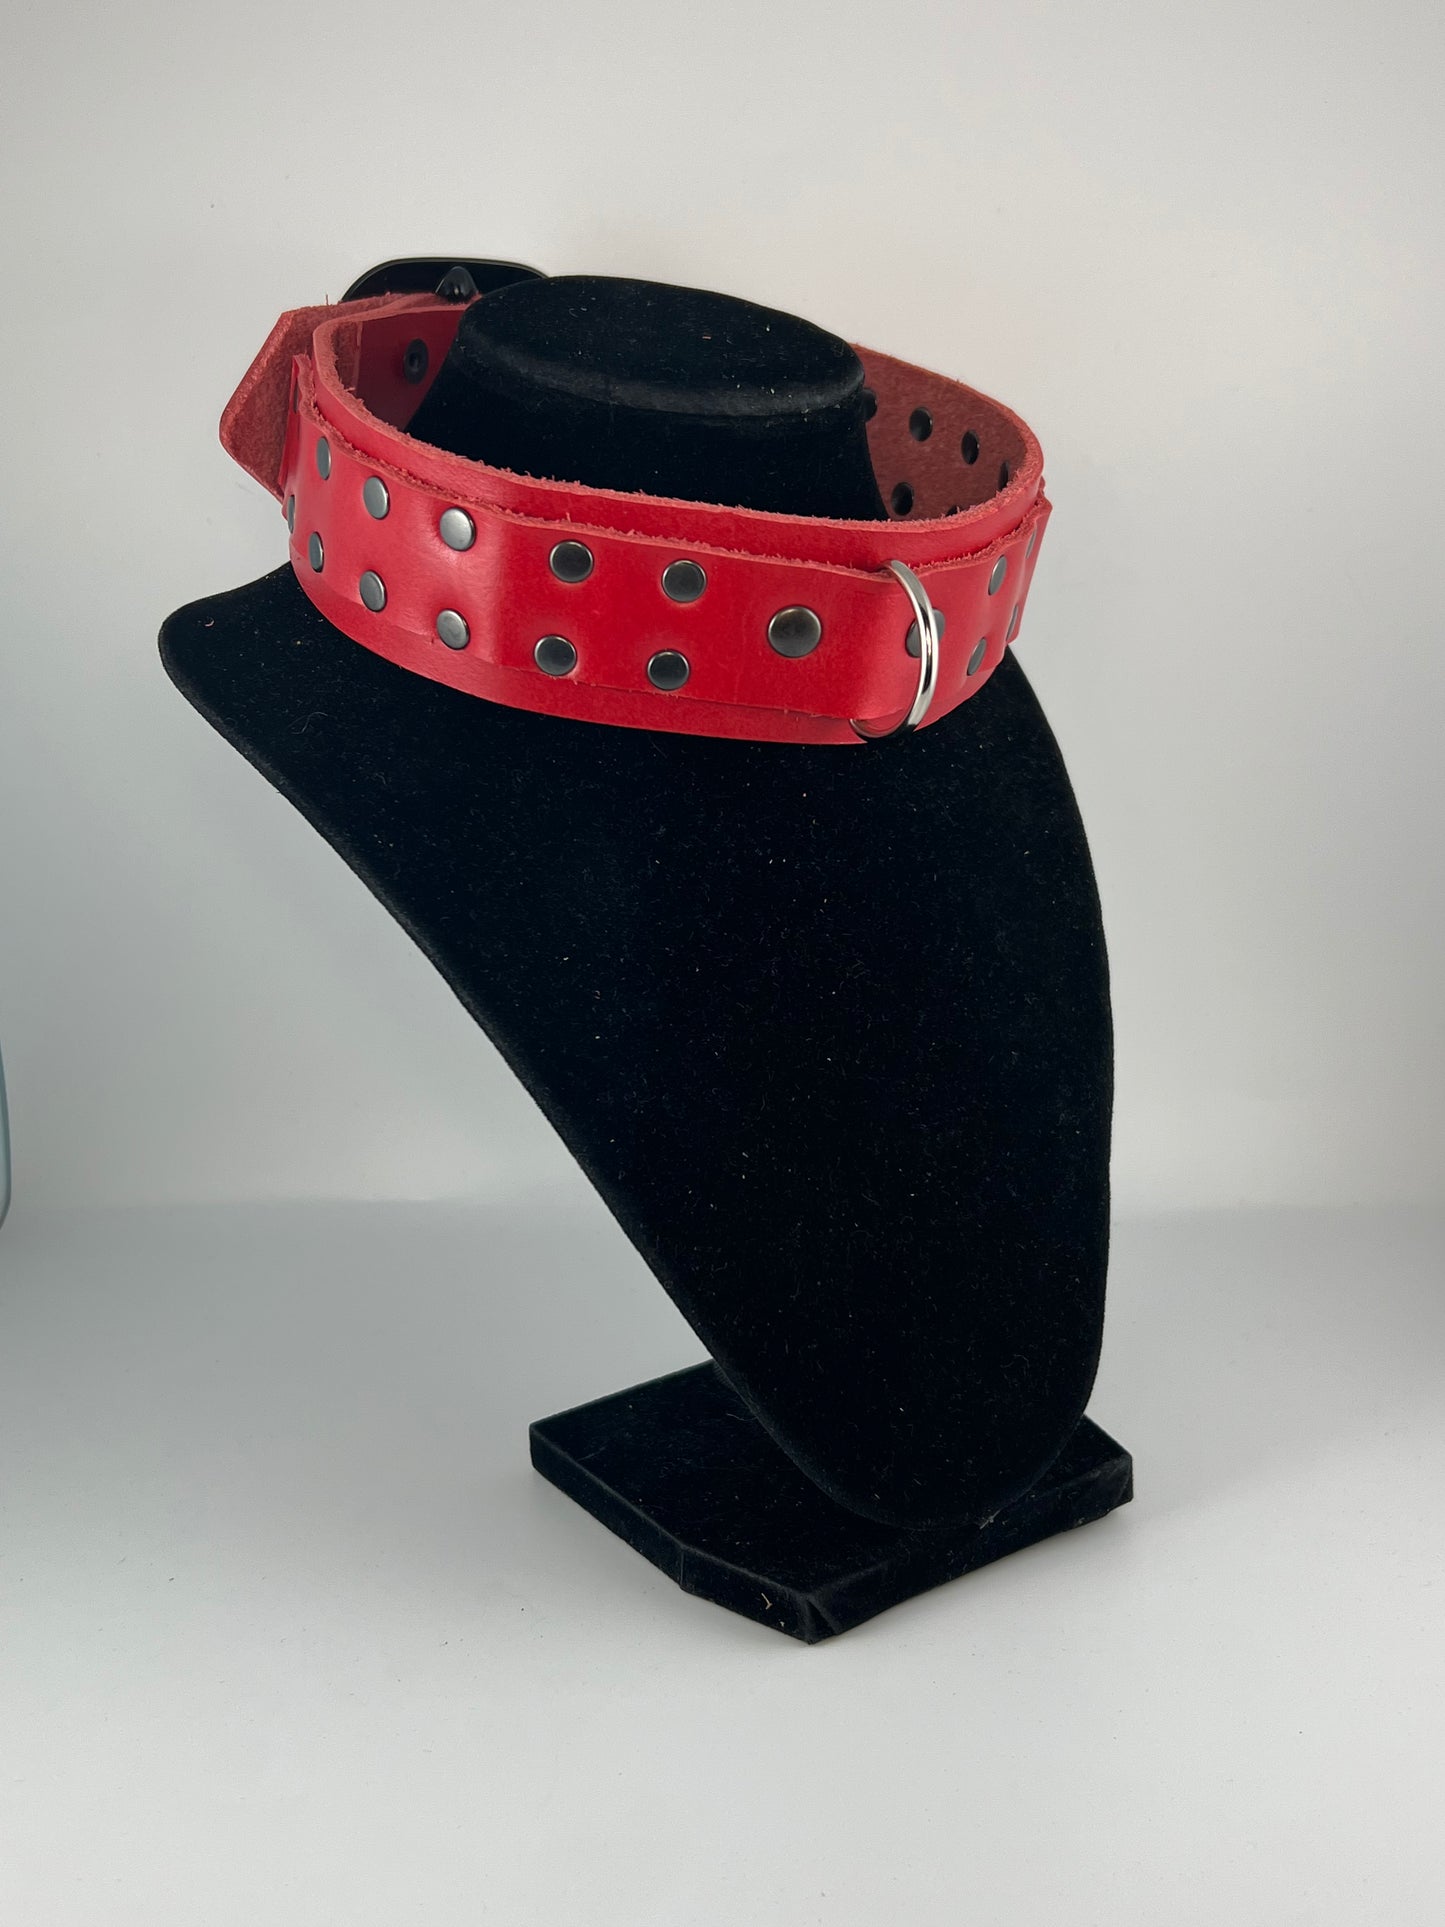 "Outlaw’s Embrace" Leather Collar